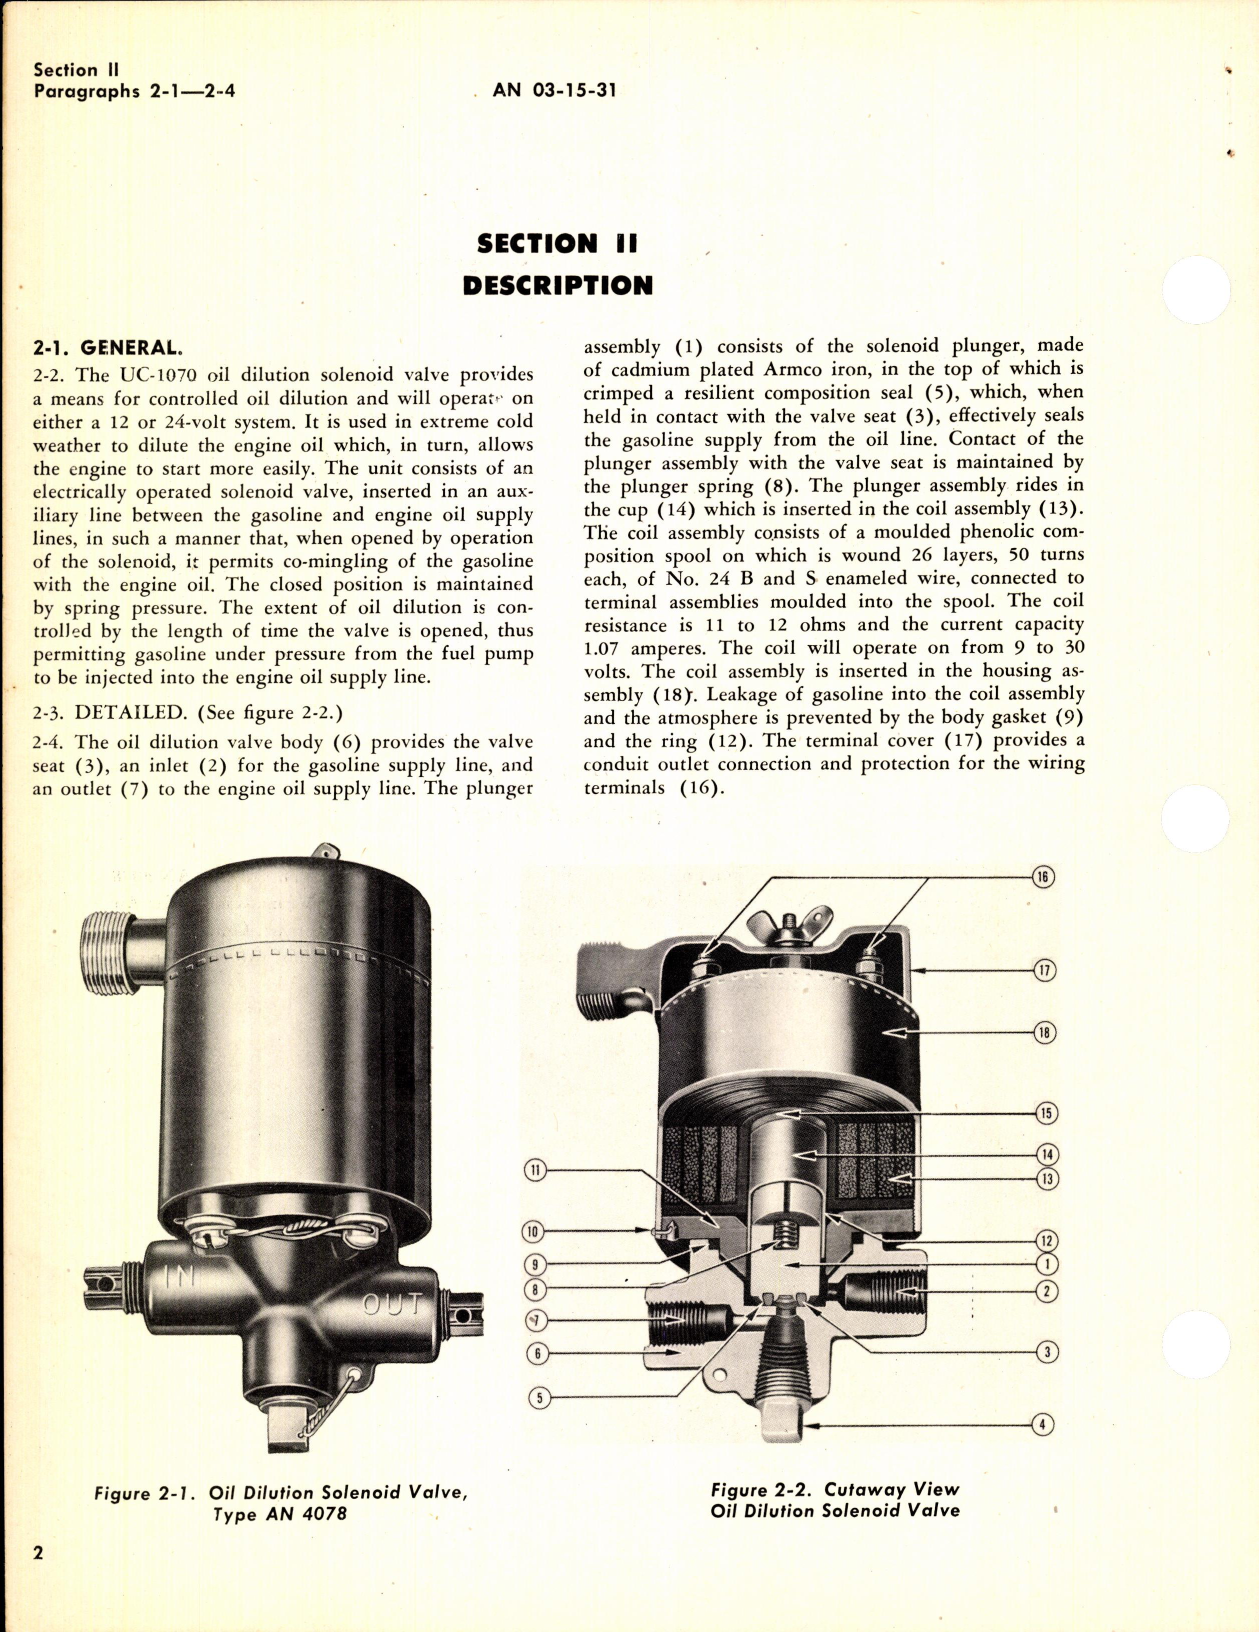 Sample page 4 from AirCorps Library document: Overhaul Instructions for Oil Dilution Solenoid Valve Type AN 4078